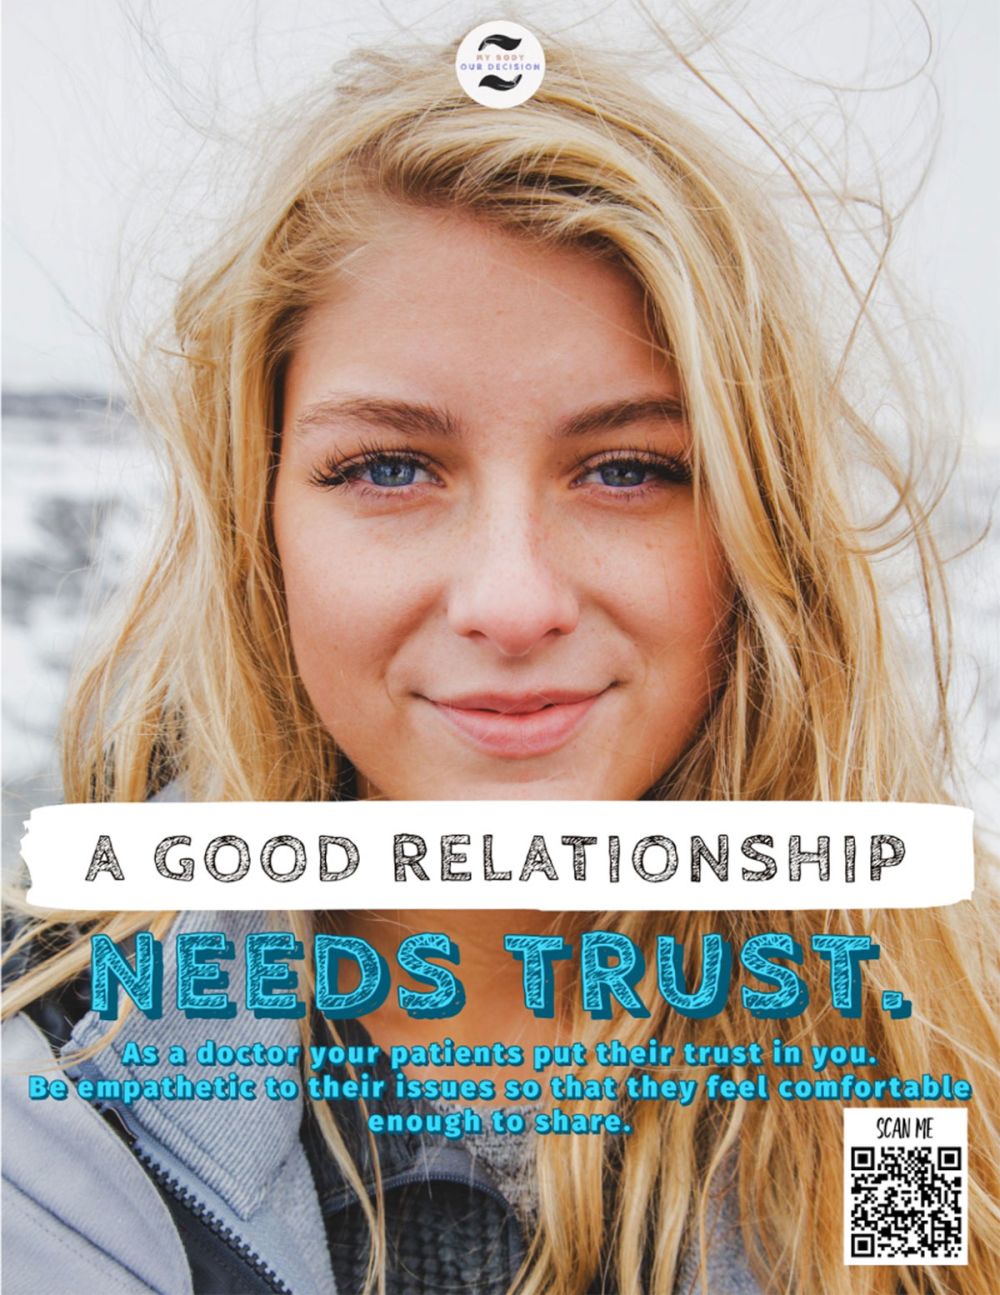 Image depicts a promotional poster promoting trust between doctors and patients.